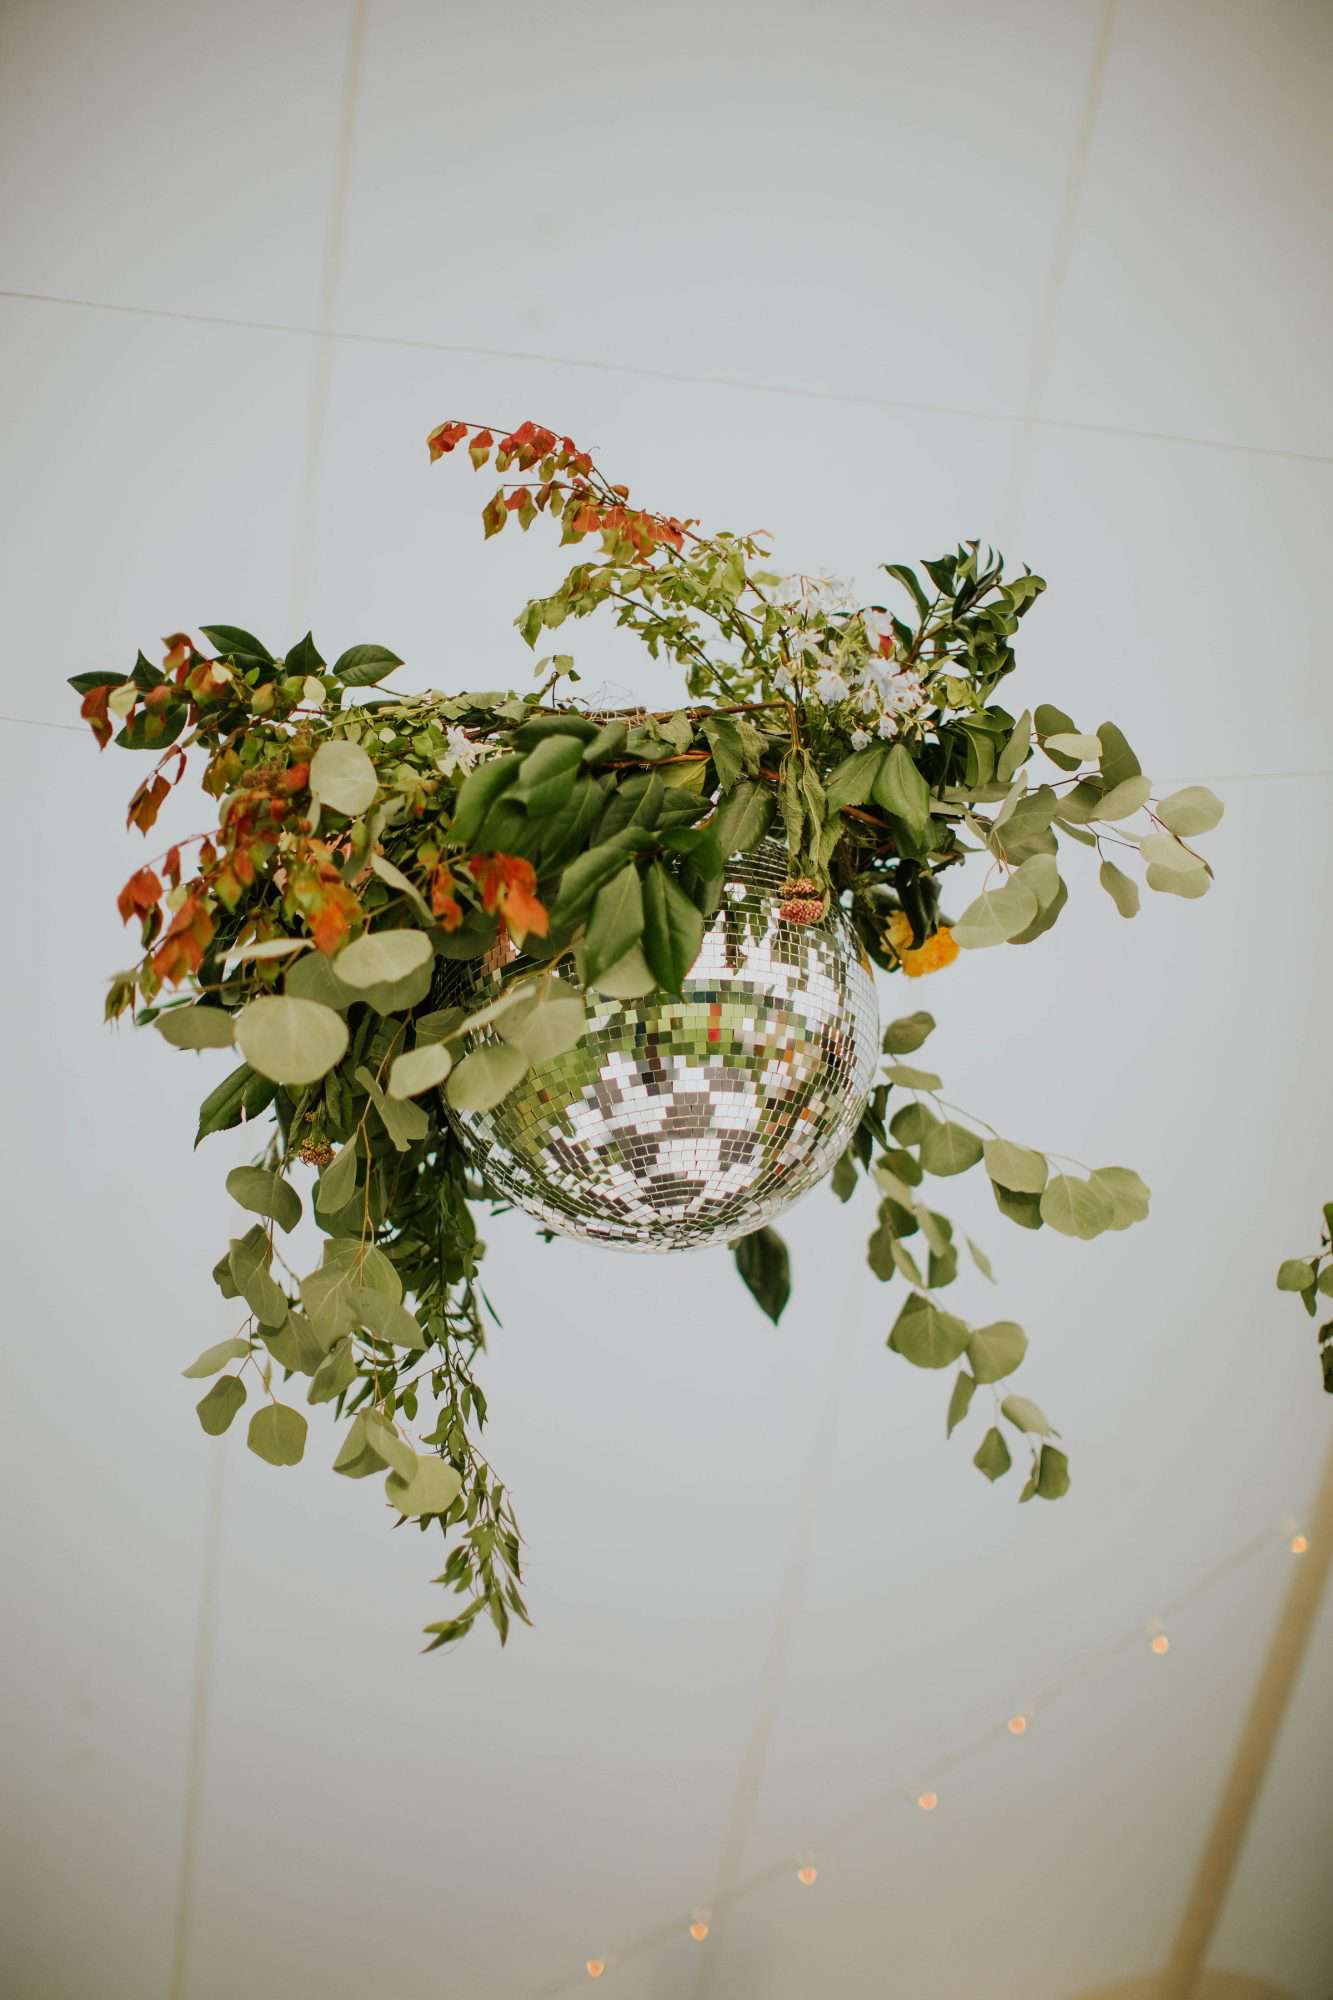 disco ball intertwined with greenery and florals